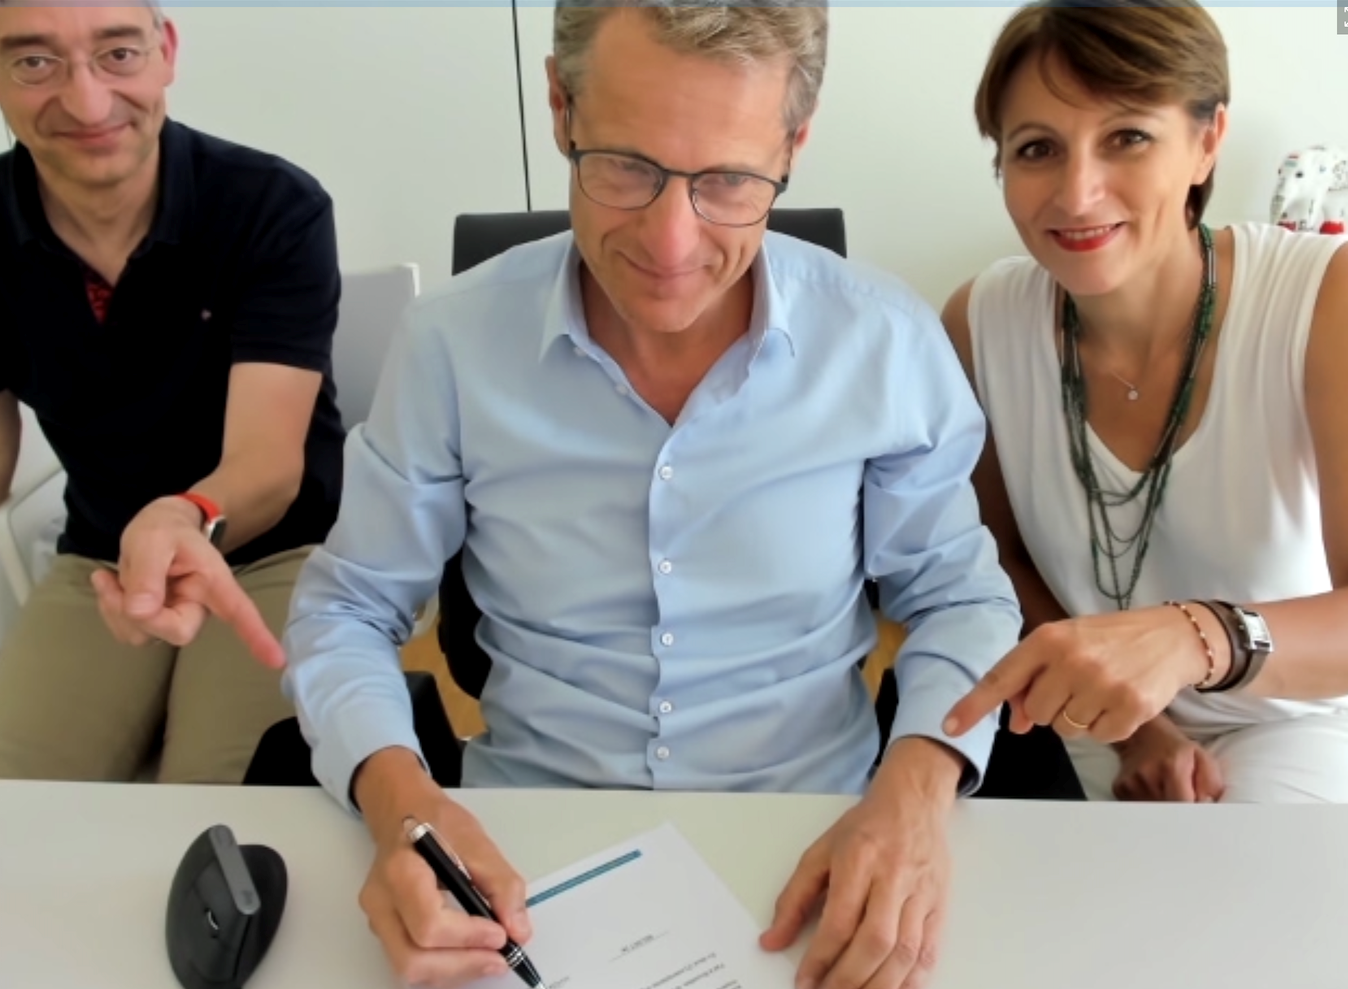 Claude Demuth signs cooperation agreement for LU-CIX accompanied by Michel Lanners and Frédérique Ulrich